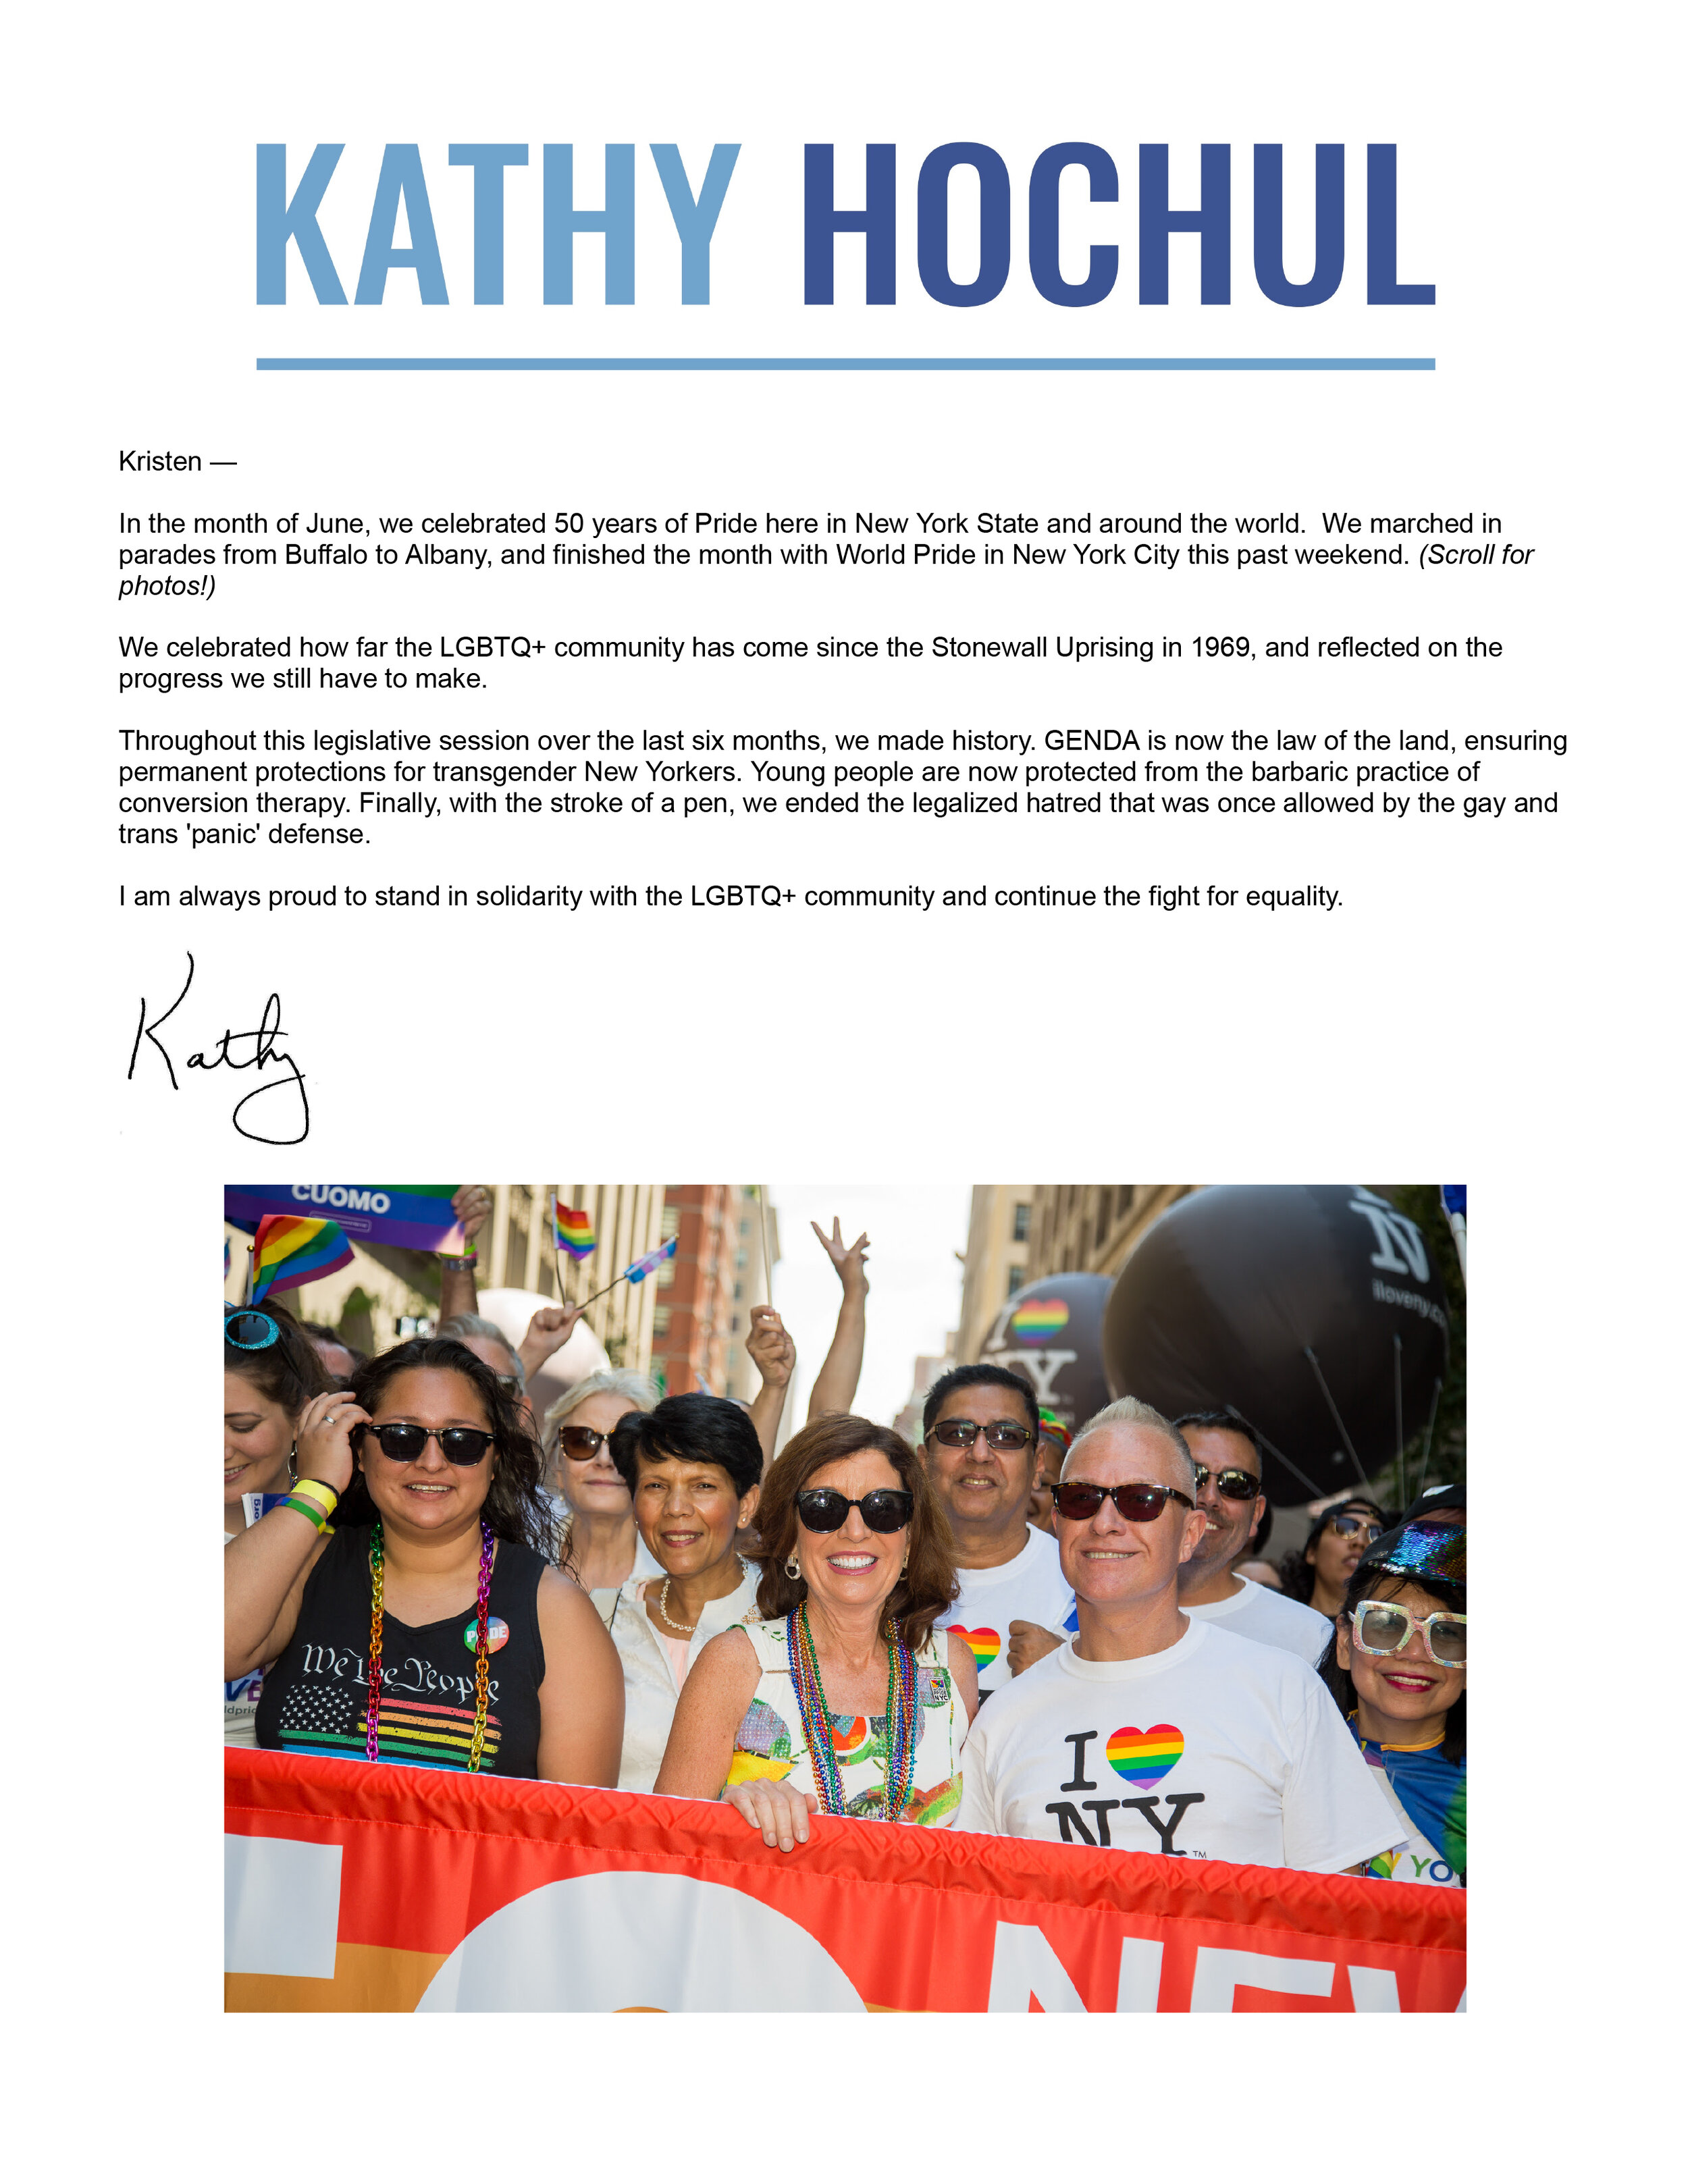  Lt. Governor Kathy Hochul celebrates World Pride and 50 Years of Pride in New York State in her Newsletter. New York, NY 2019 